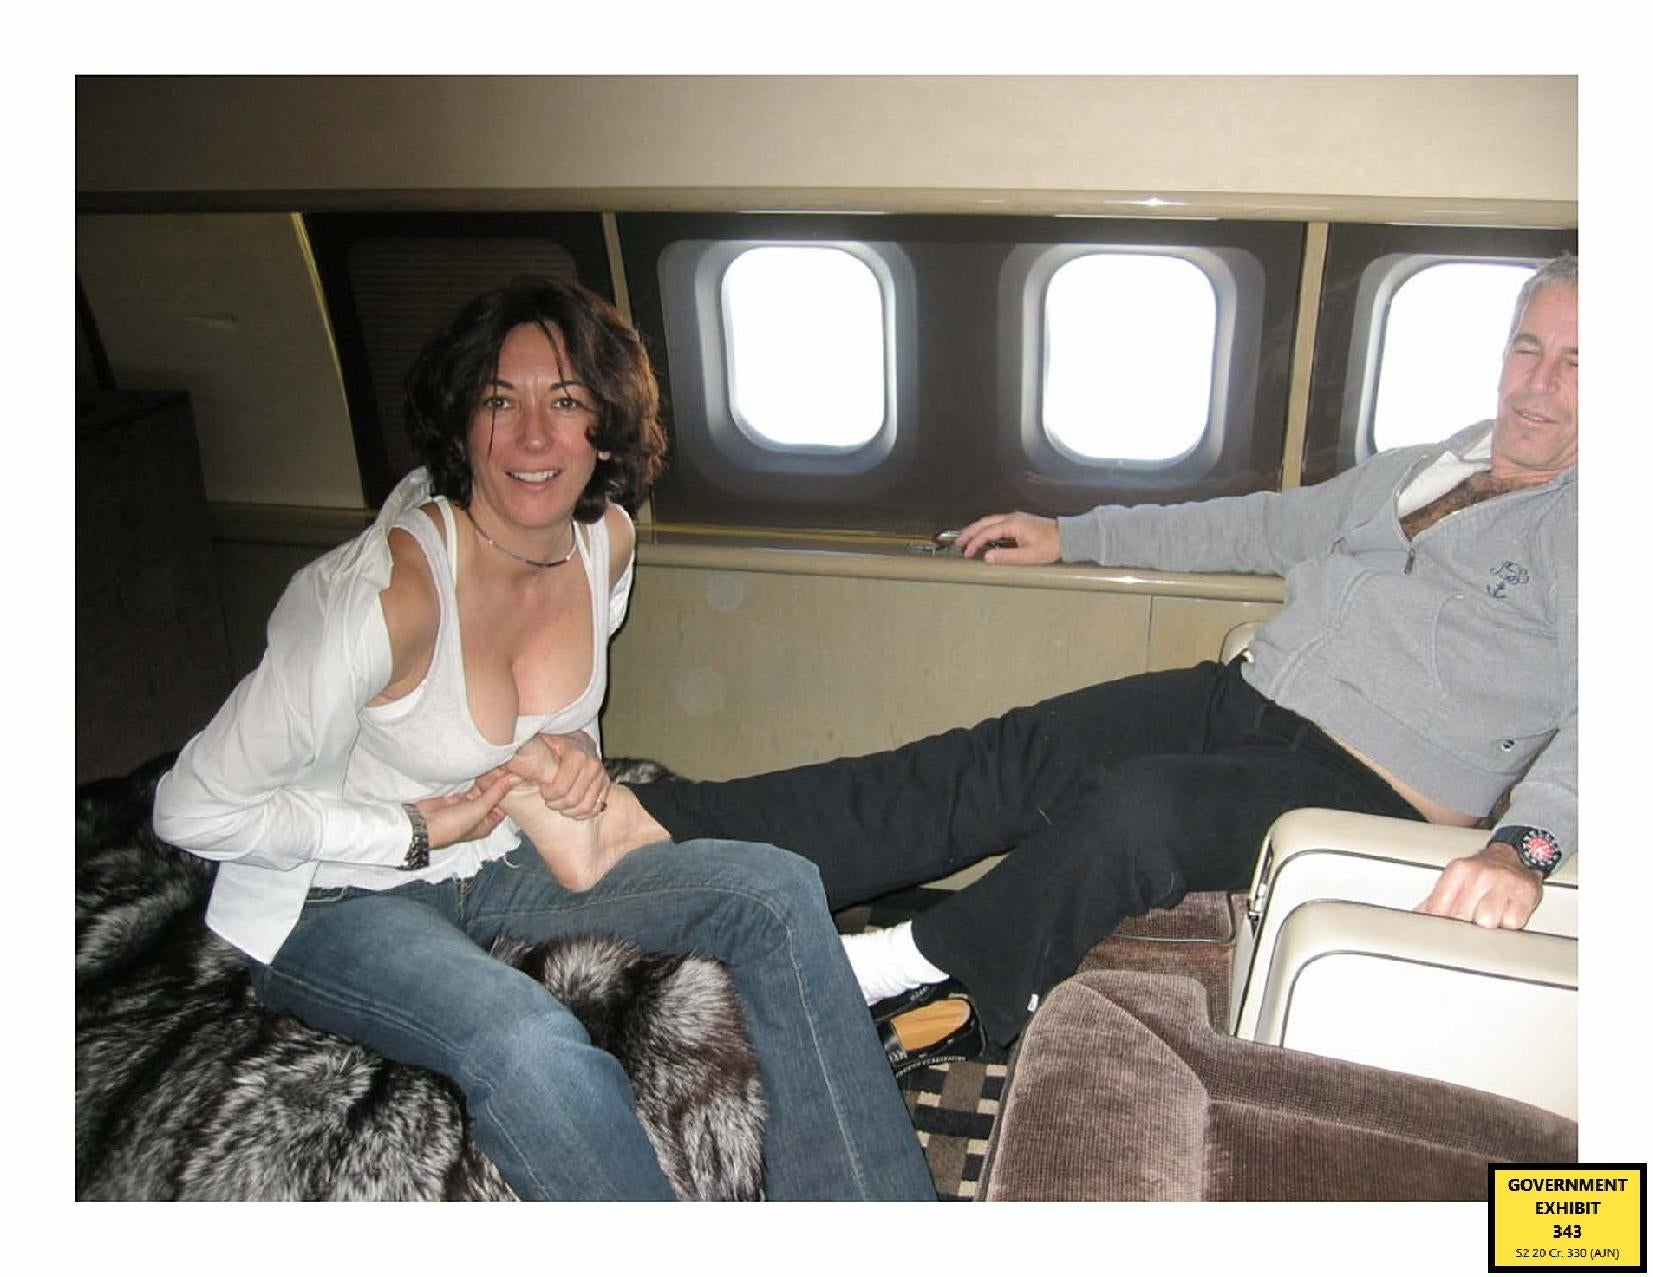 Maxwell massages Epstein’s feet with her breasts aboard a private jet